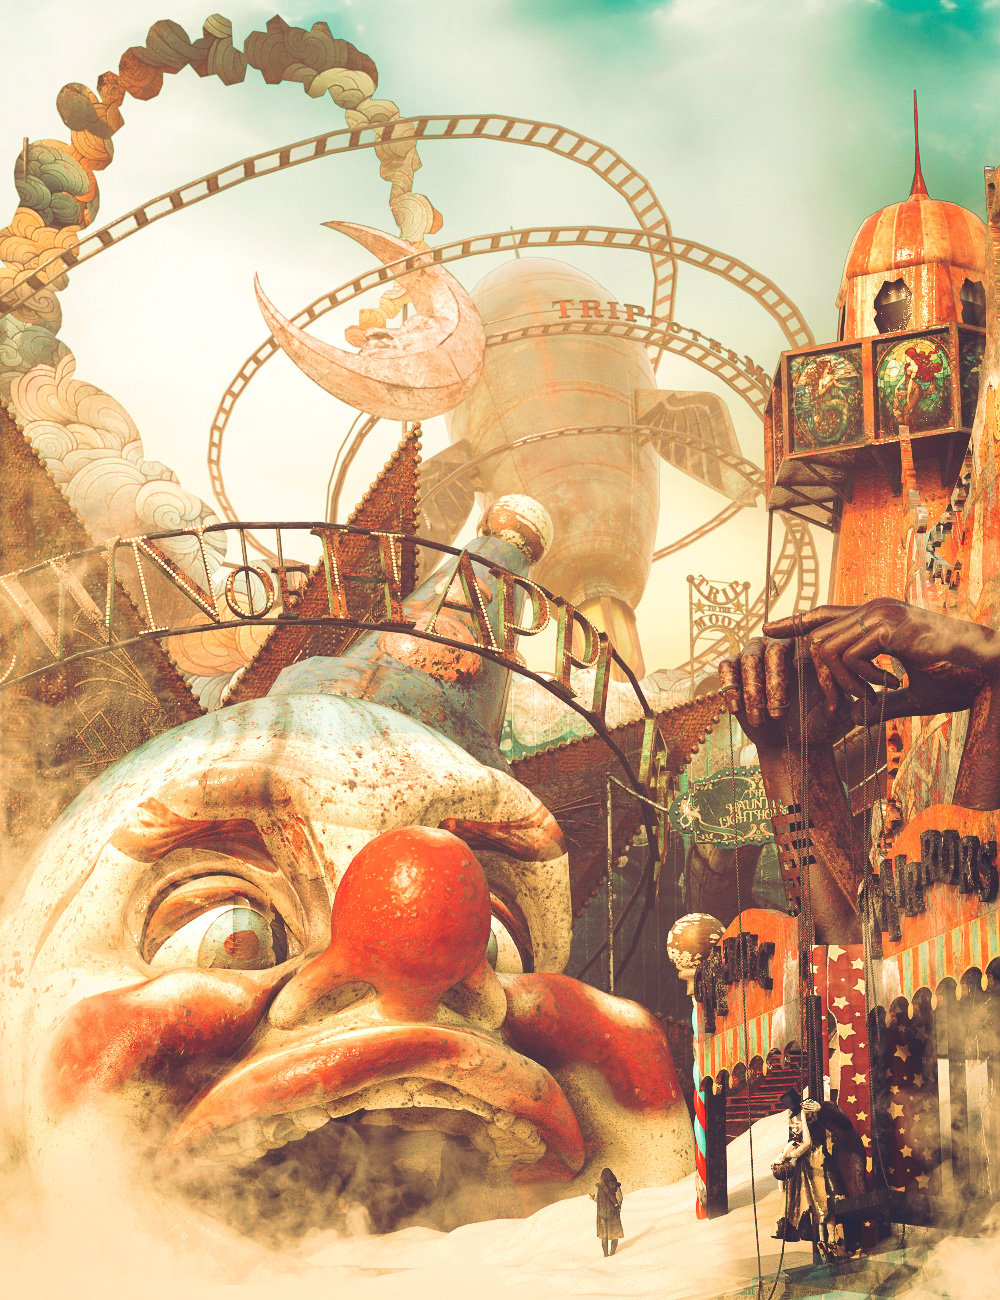 Desolated Carnival by: Ansiko, 3D Models by Daz 3D